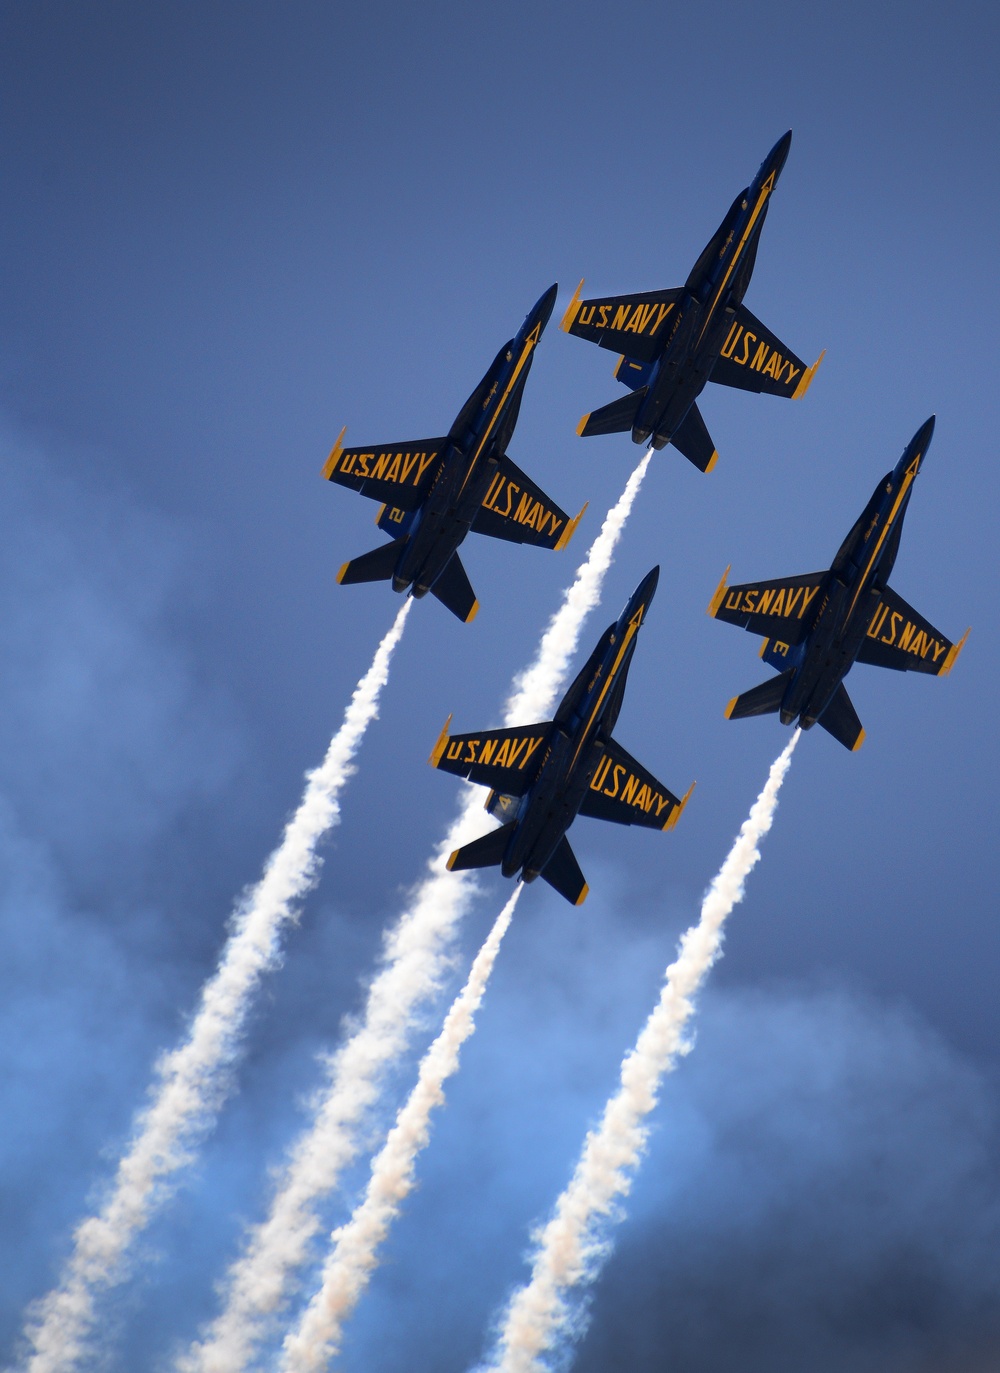 BLUE ANGELS IN EAST TENNESSEE